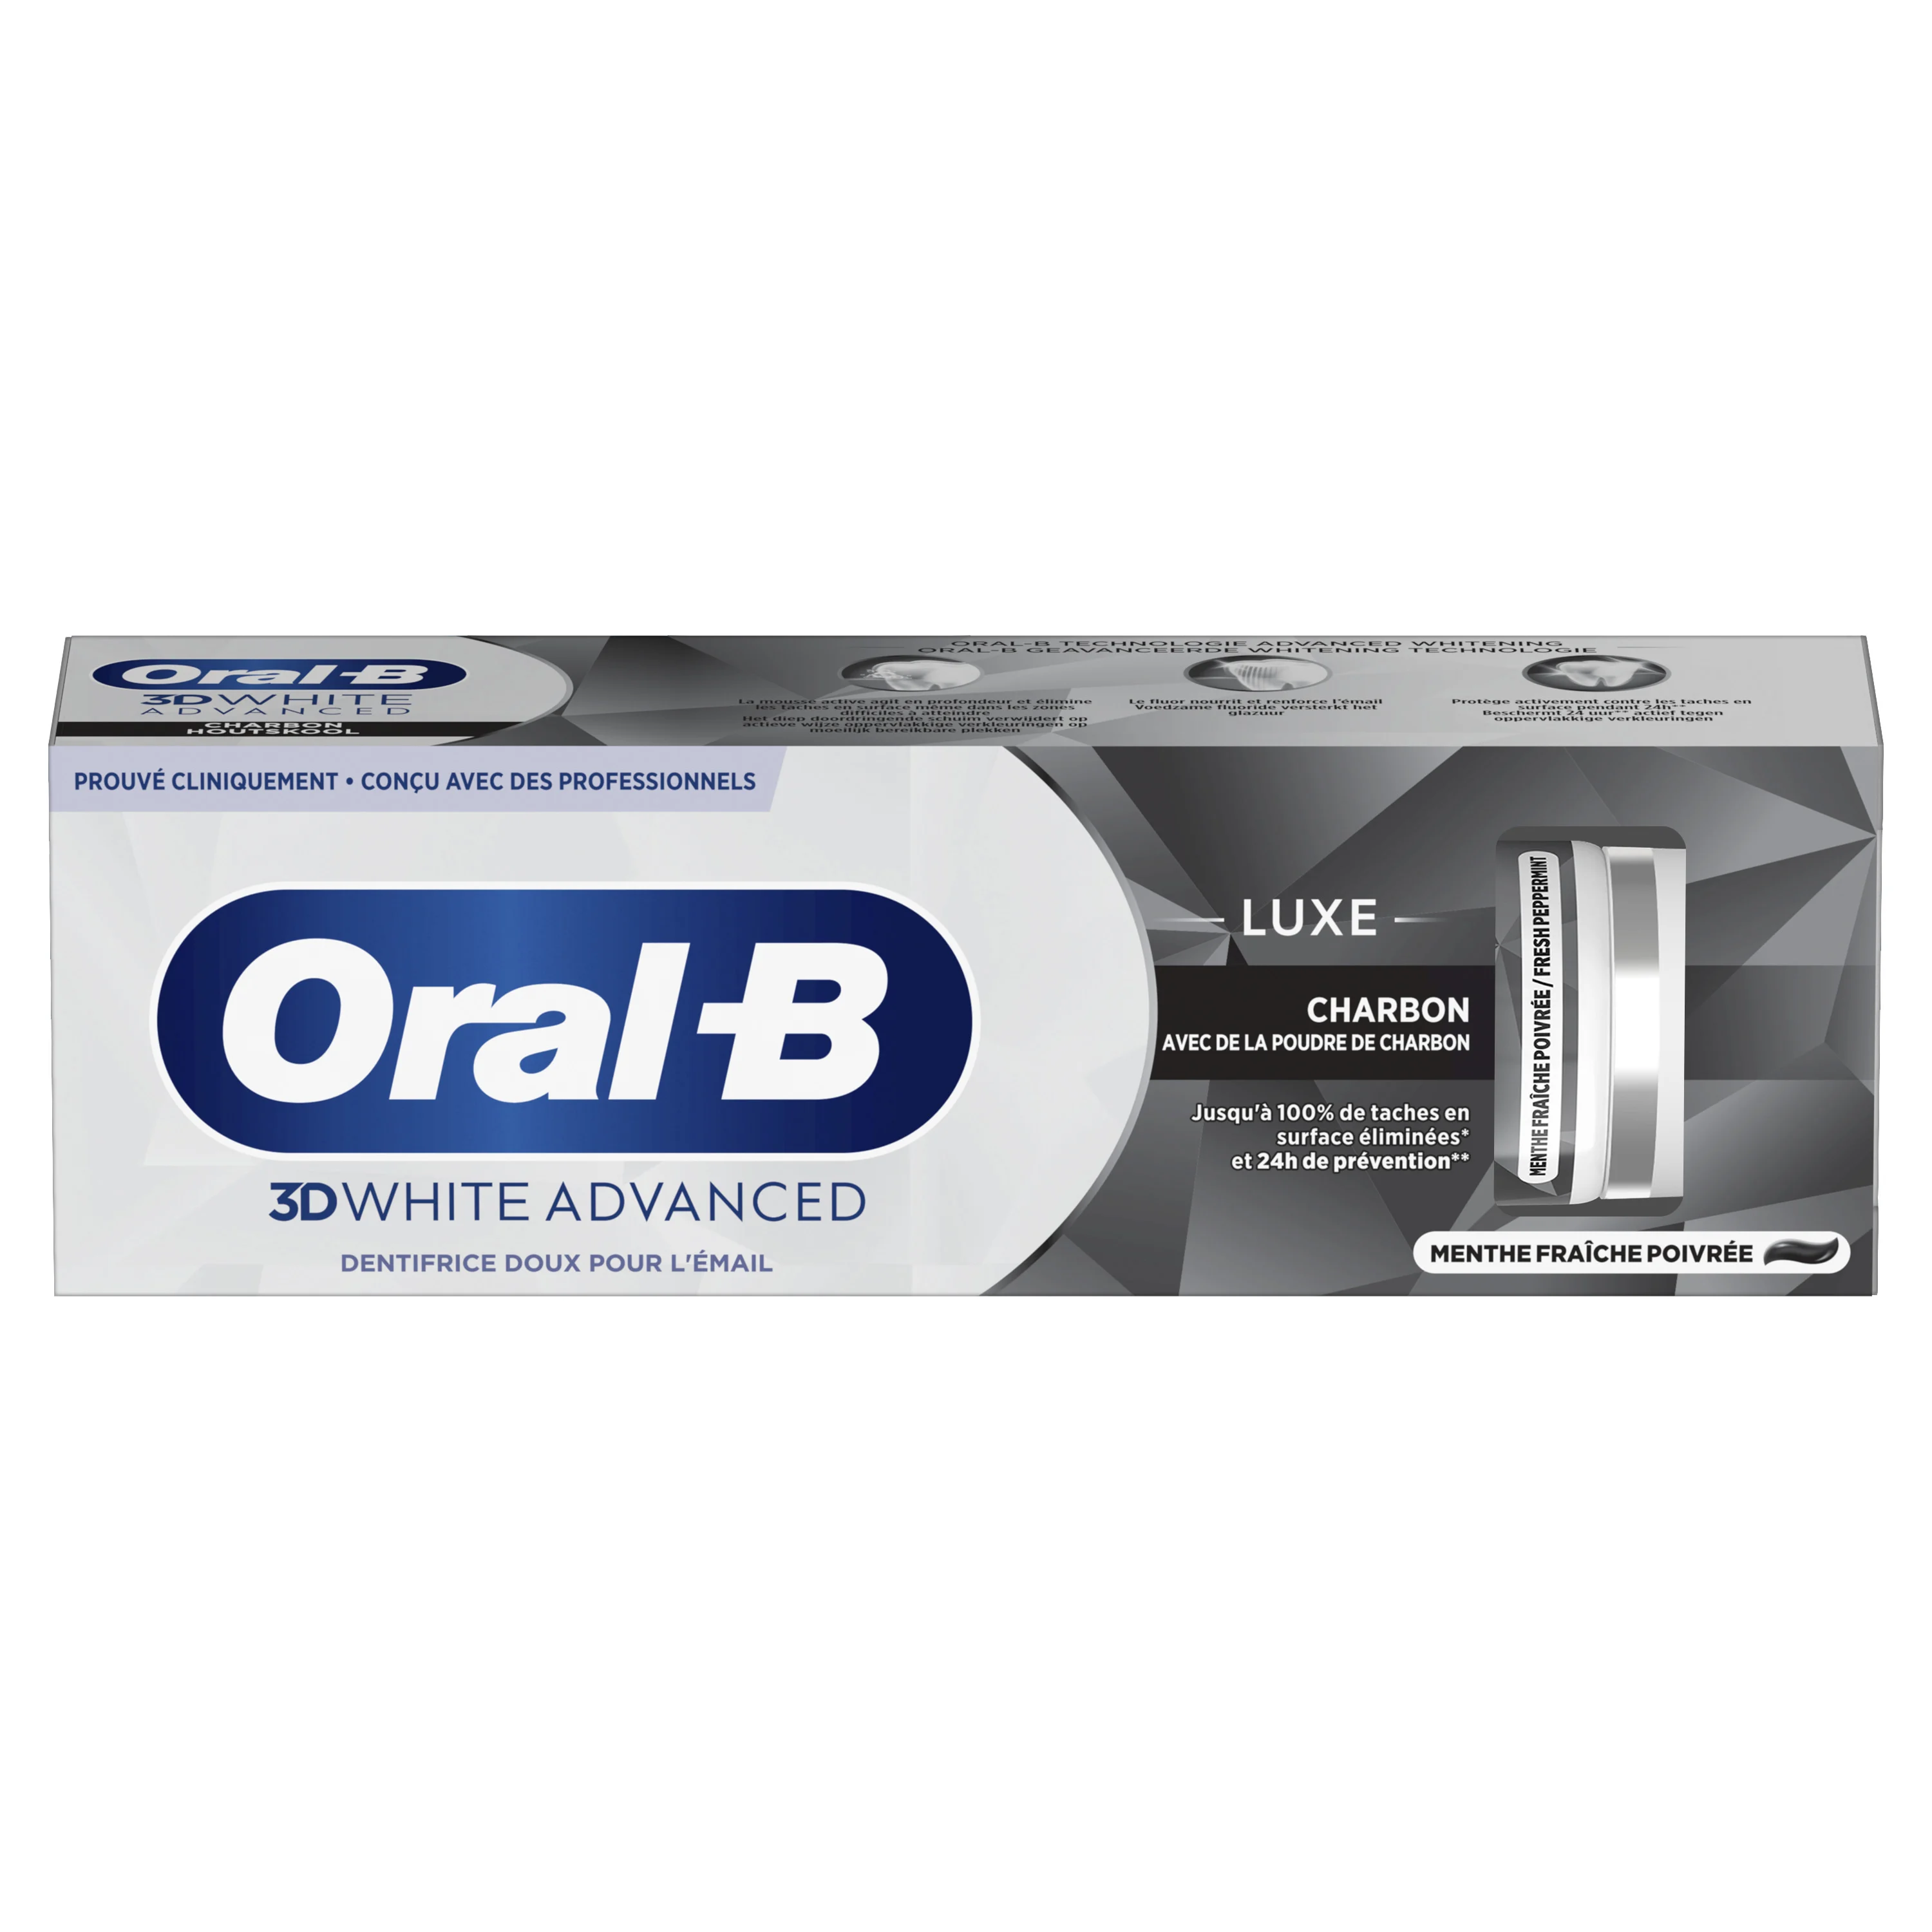 Oral-B 3D White Advanced Luxe Charbon Dentifrice 1 